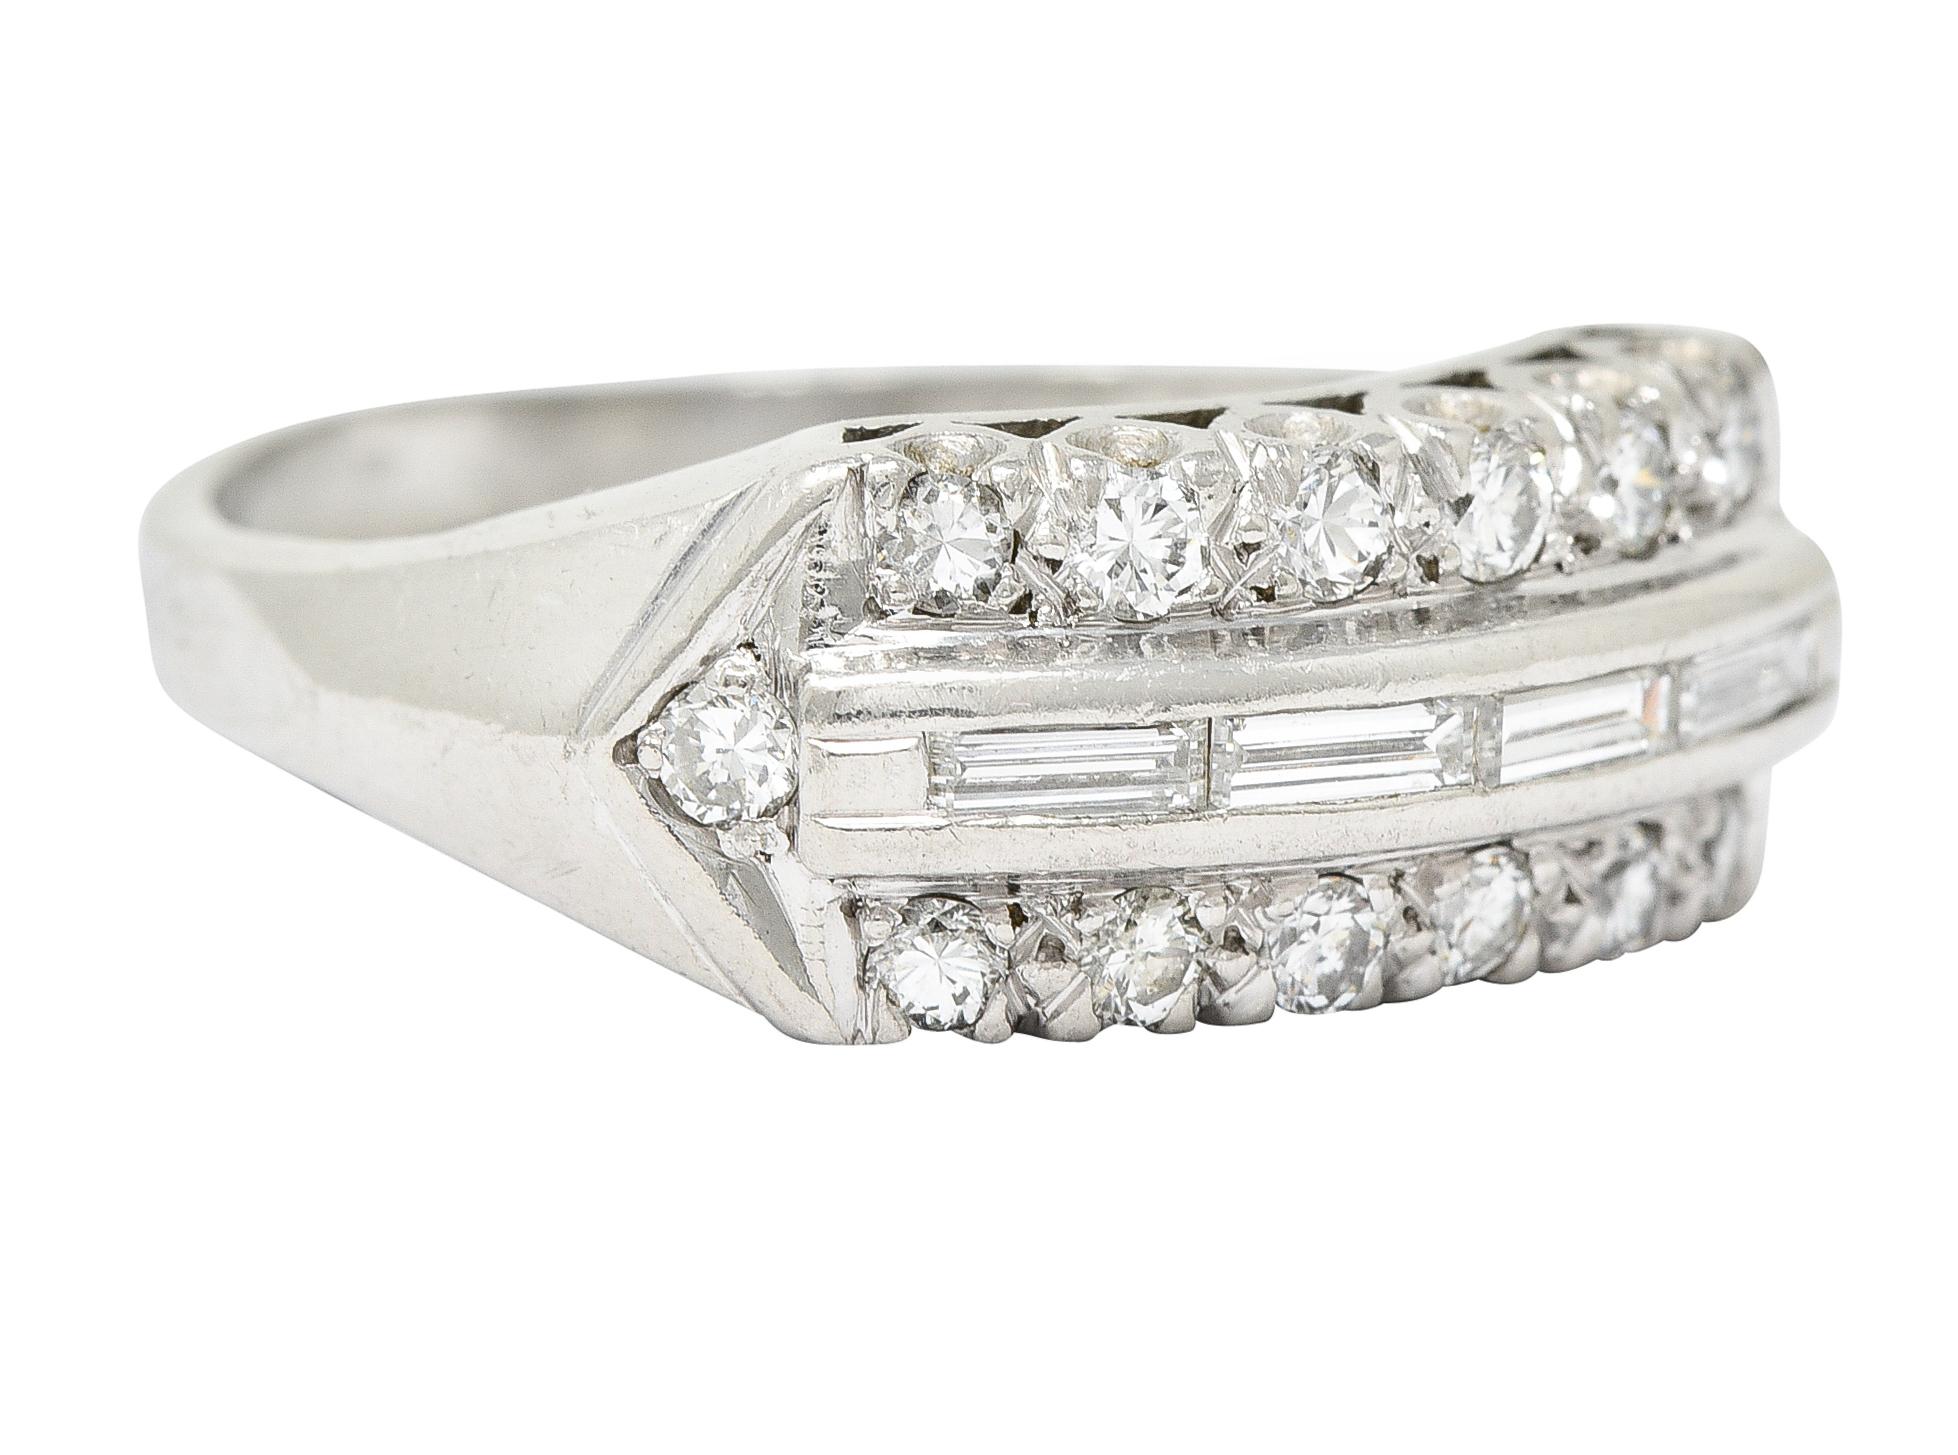 Band ring is comprised of three rows of diamonds. With a raised central channel of straight baguette cut diamonds. Flanked North and South by round brilliant cut diamonds set in a fishtail motif. Total diamond weight is approximately 0.50 carat with